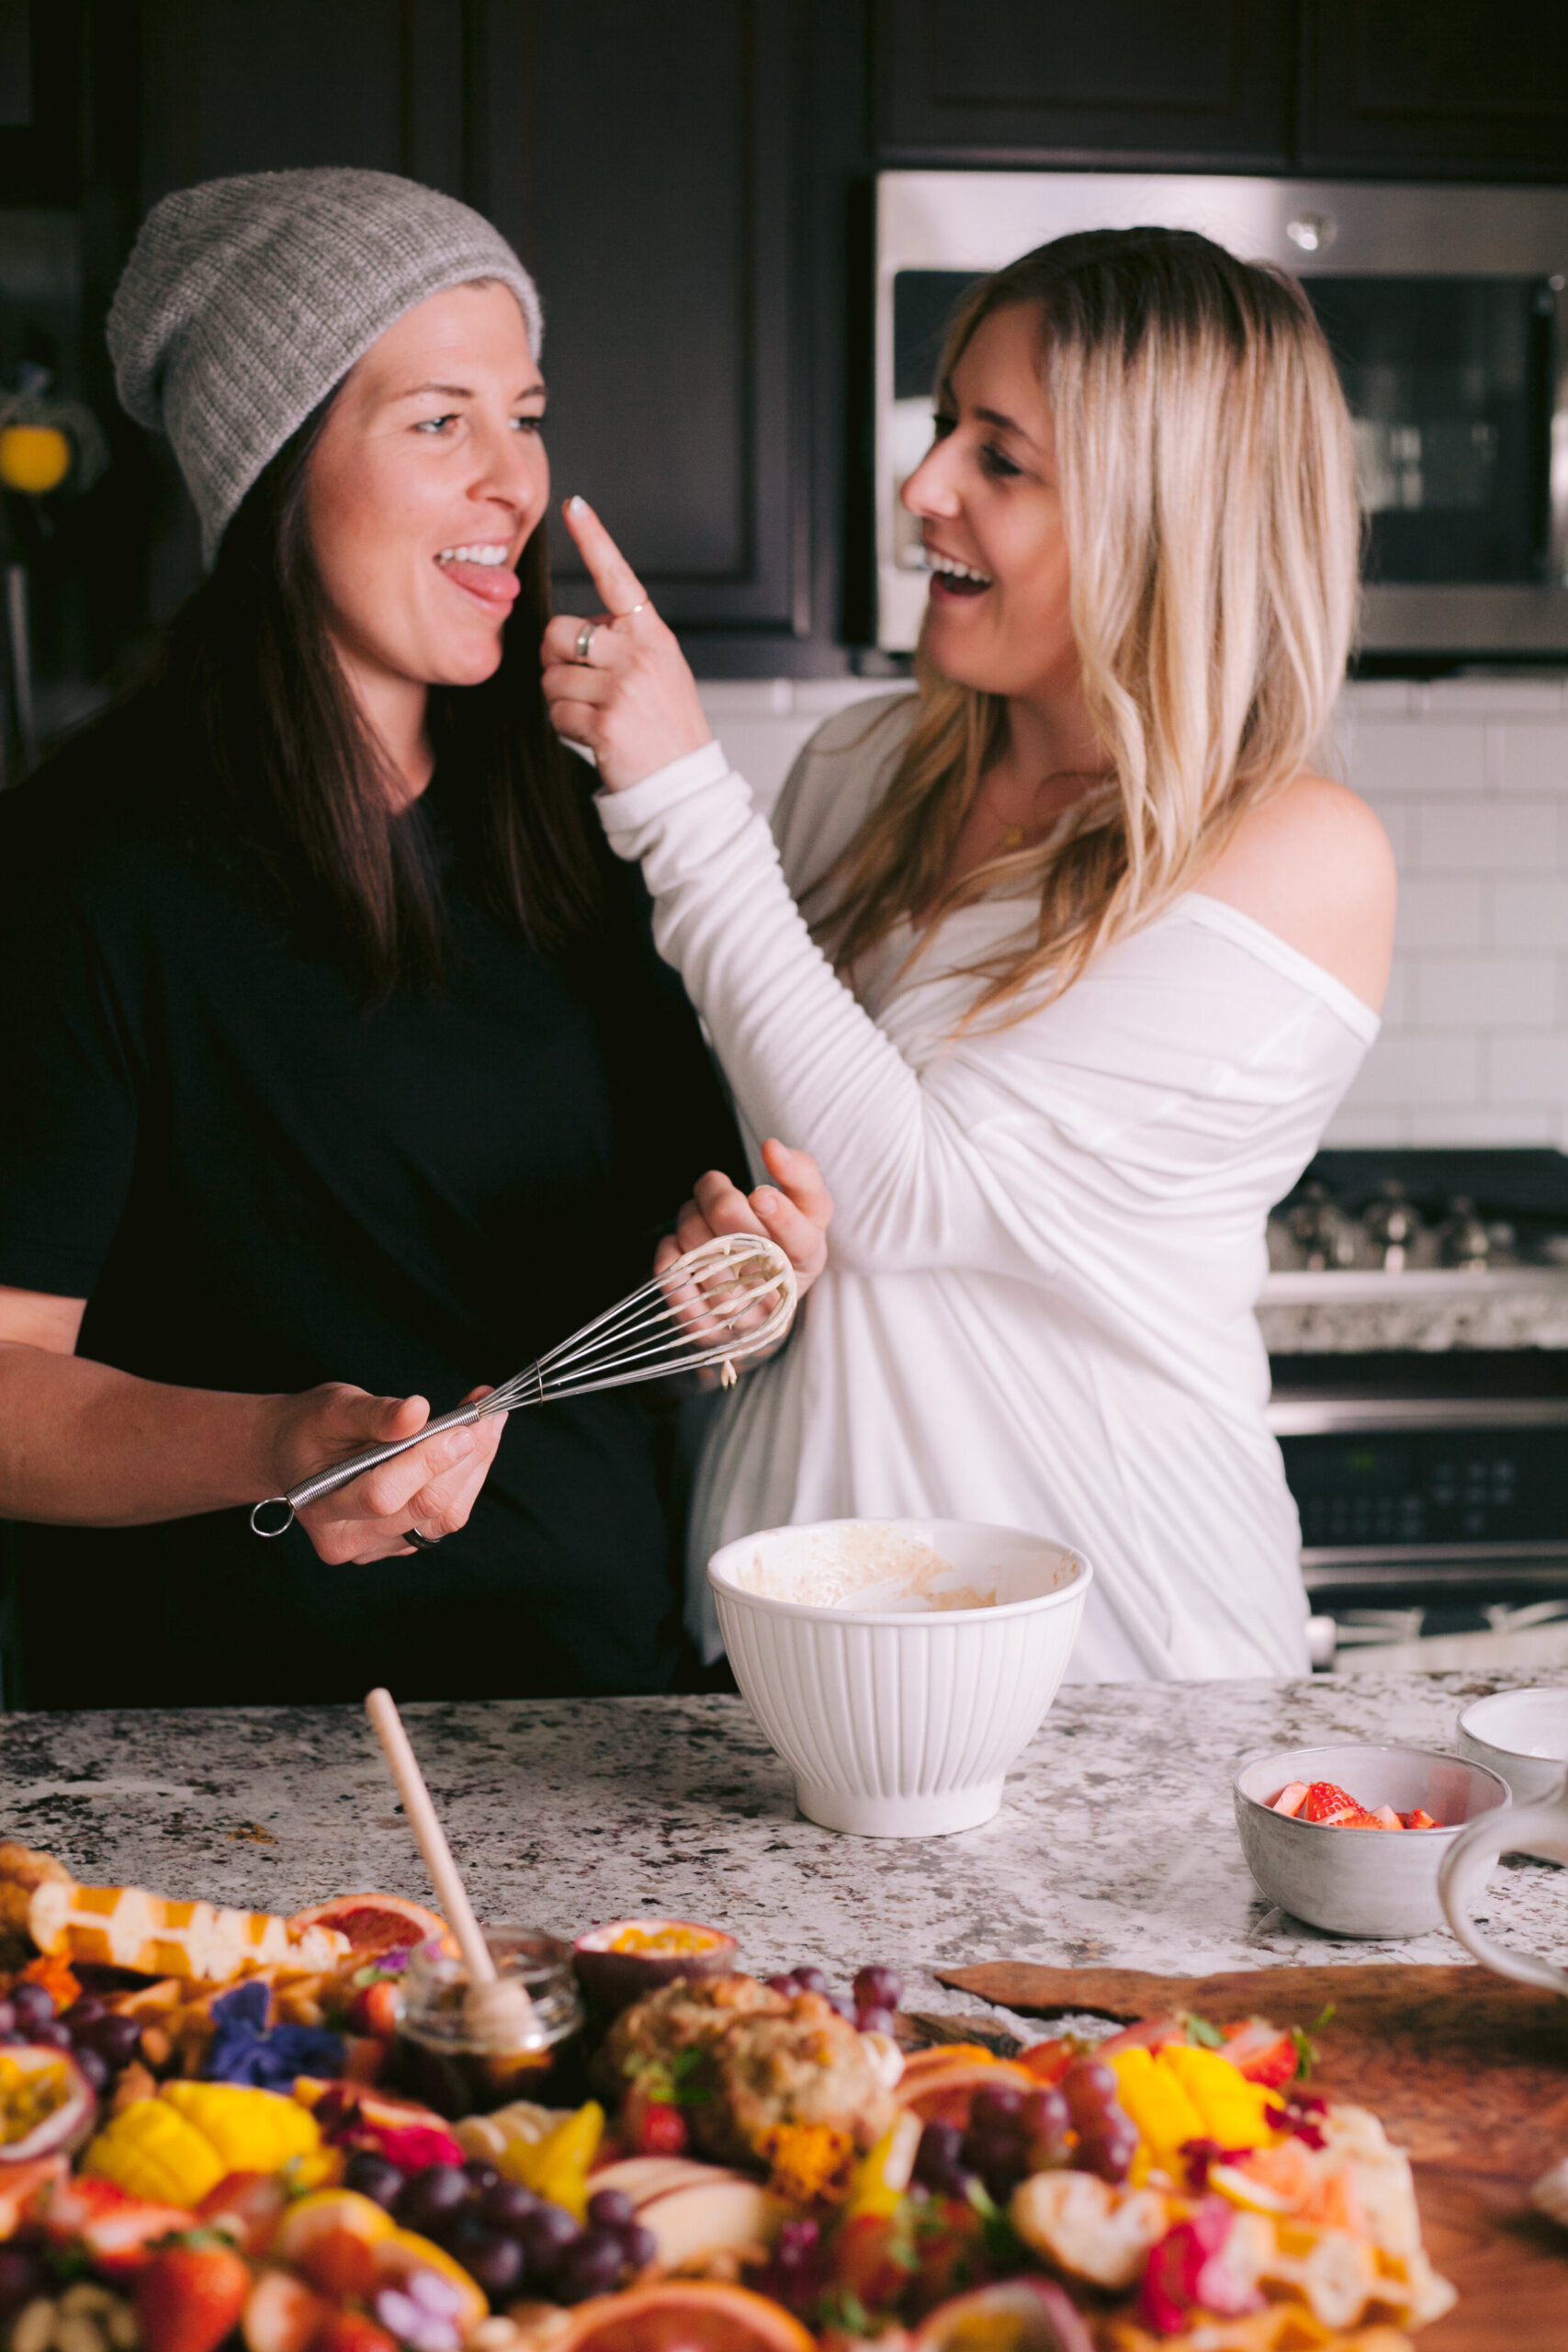 Blonde woman touched brunette woman on the nose with waffle batter